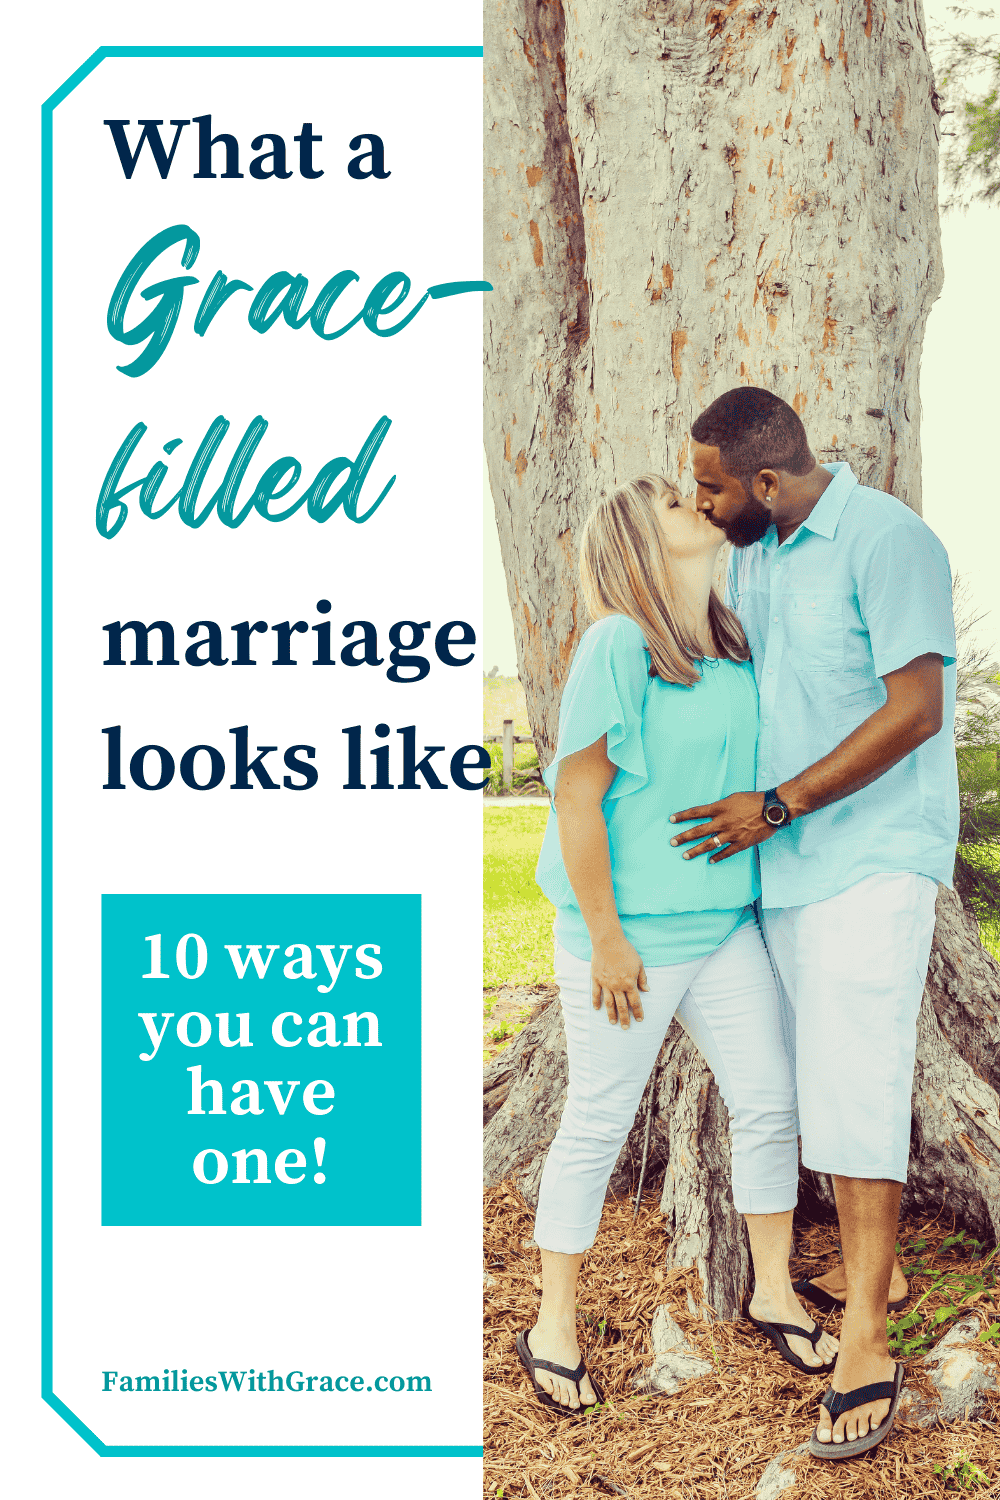 What a grace-filled marriage looks like